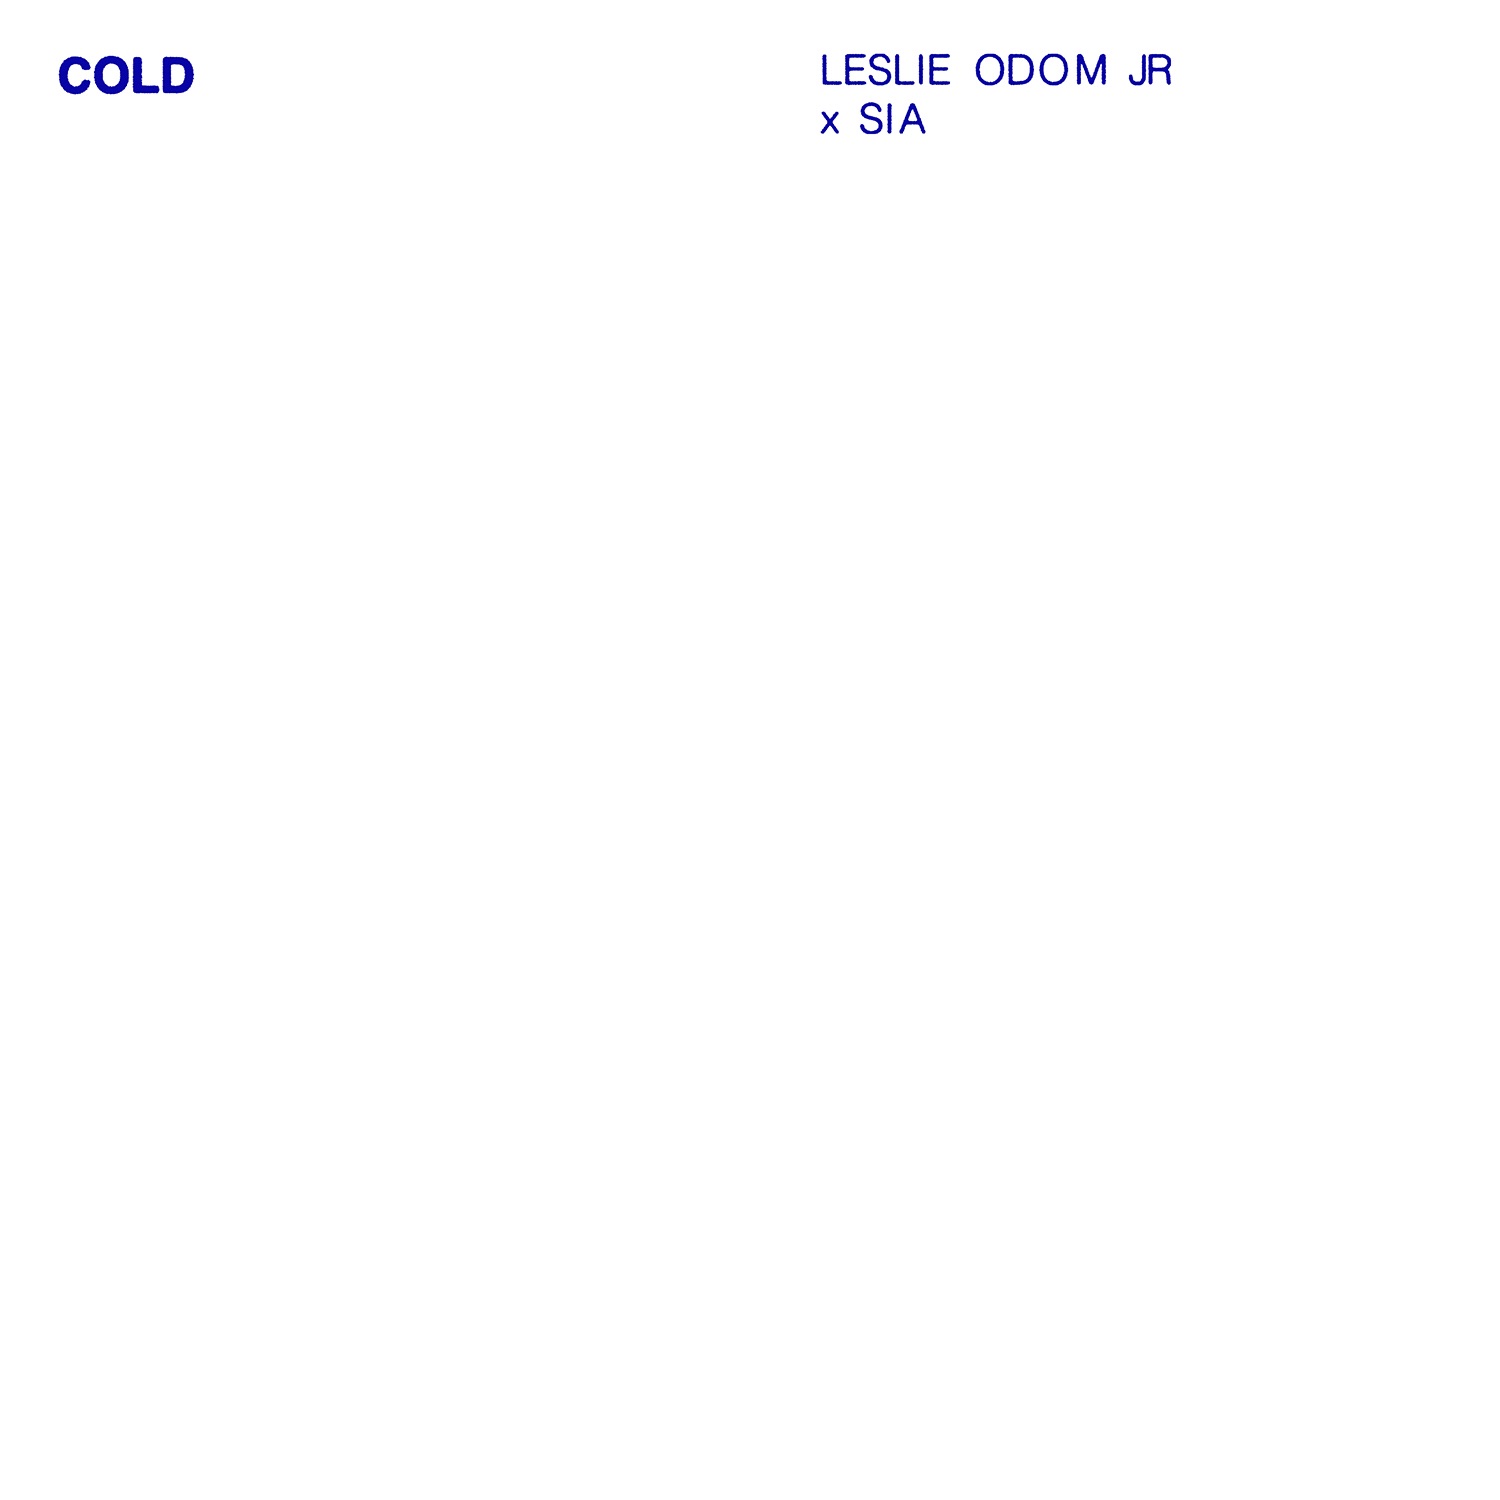 Leslie Odom, Jr. - Cold (feat. Sia) - Single